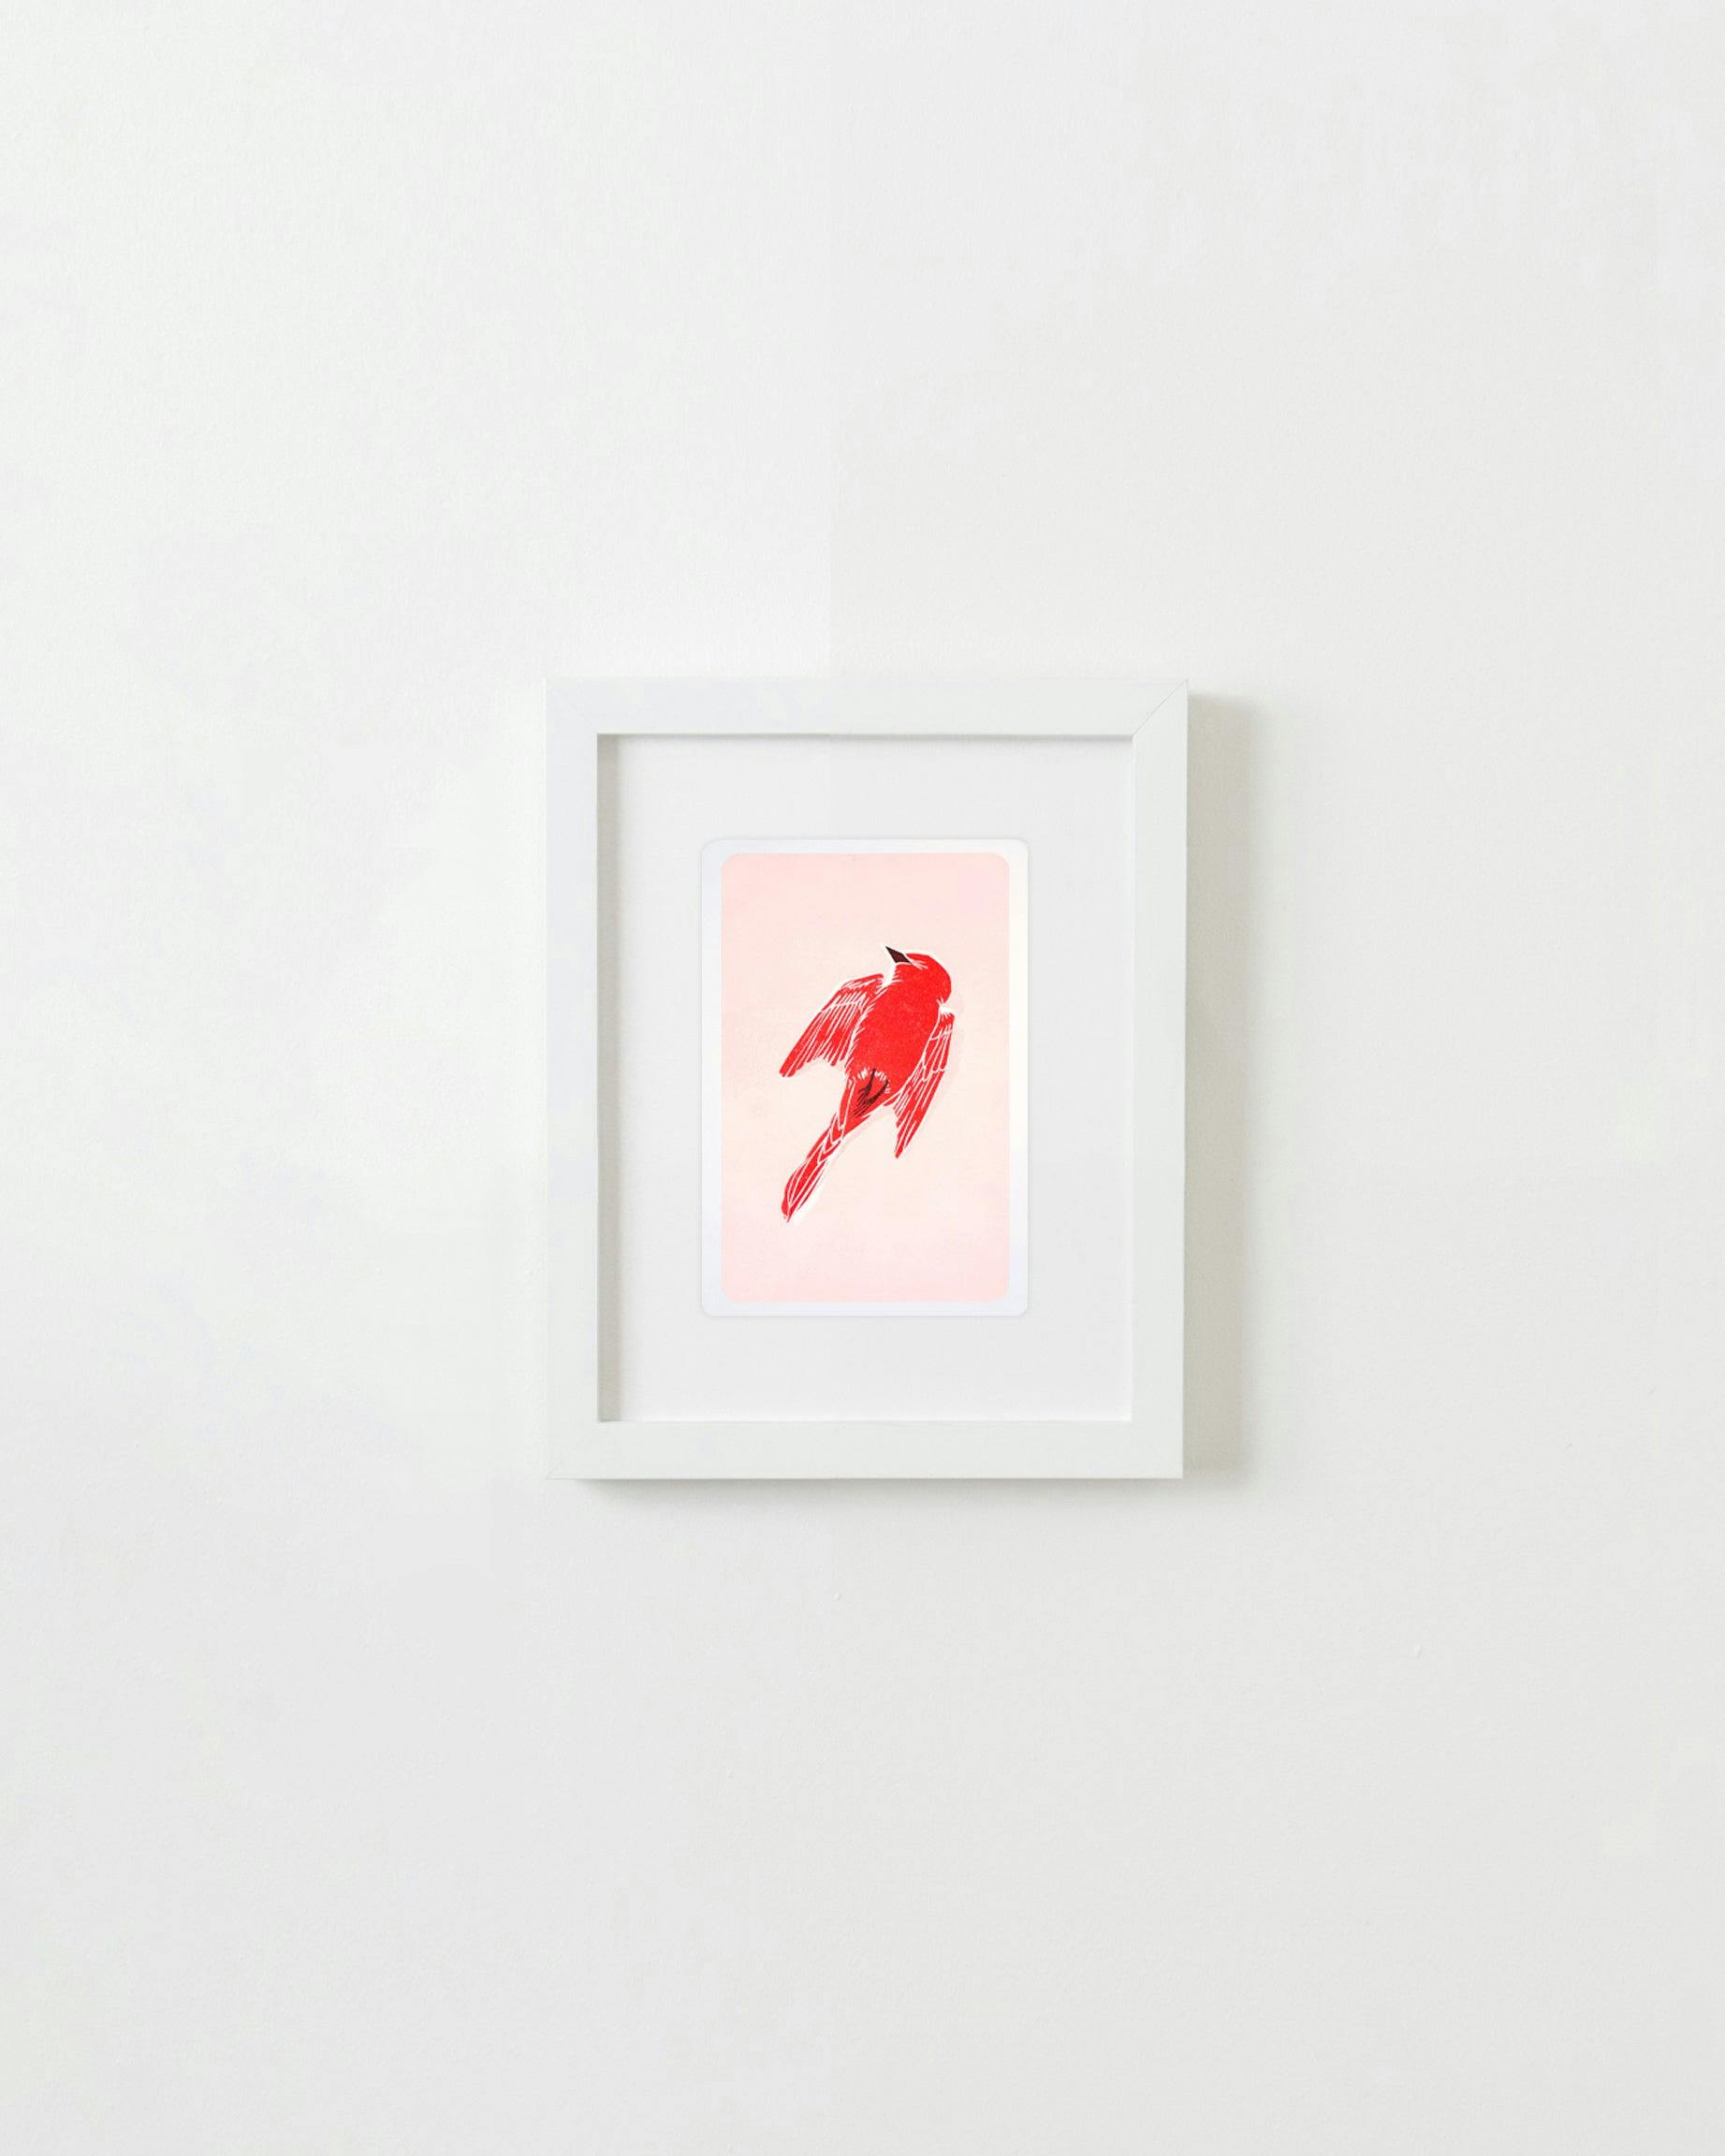 Print by Langdon Graves titled "Dead Bird (Mourning, red)".